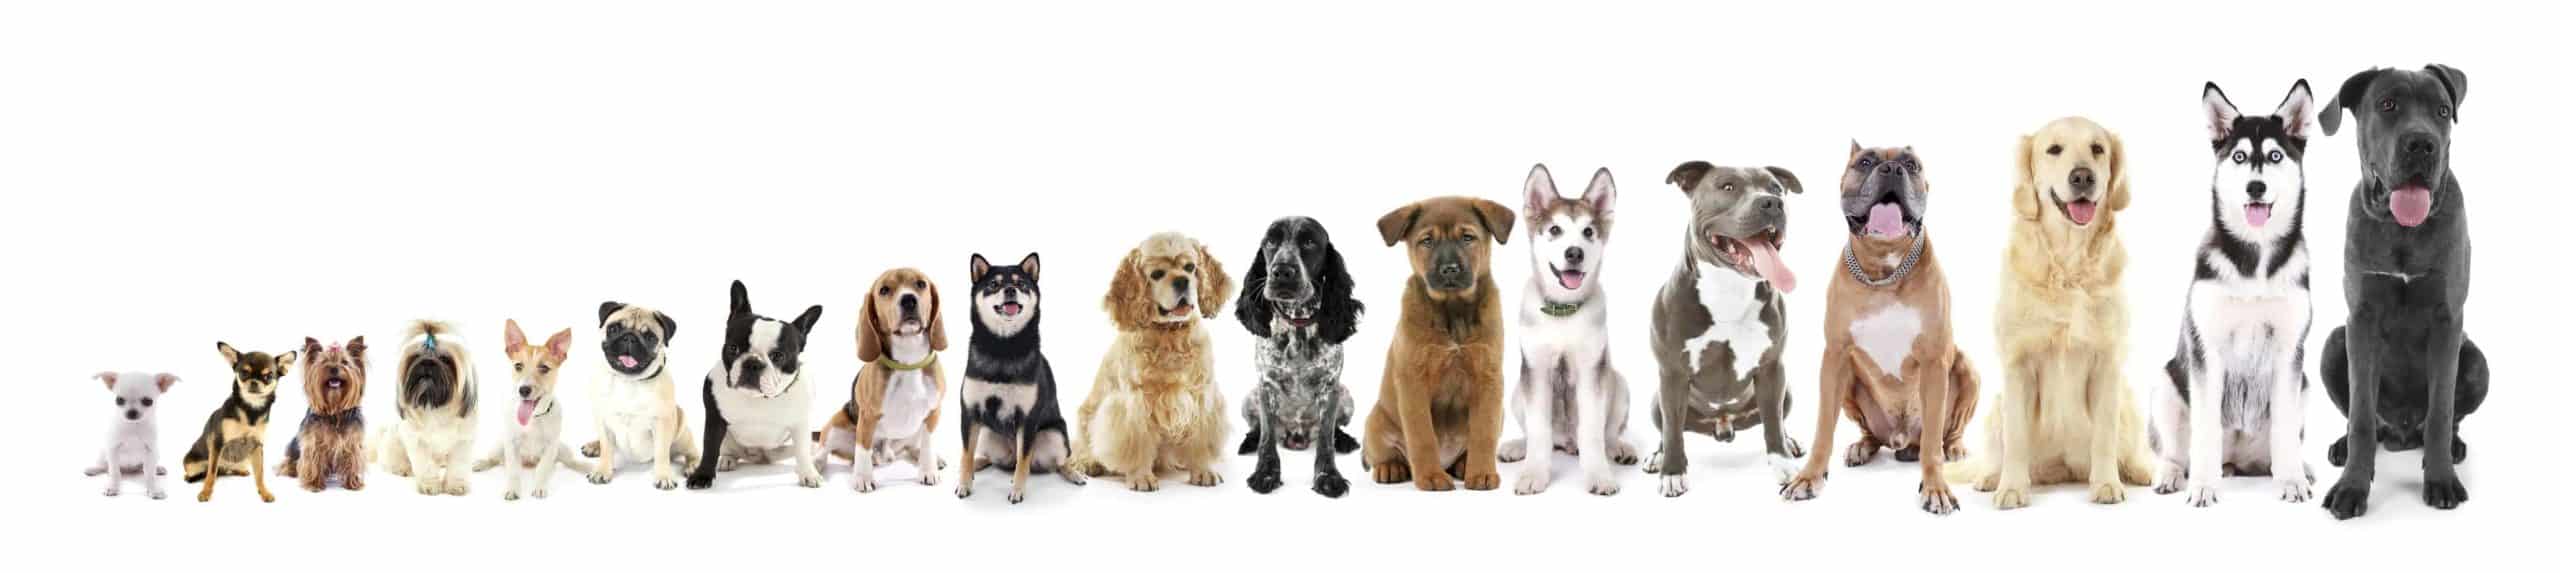 Dog Breed Size Choose Based On Your Space Available Time